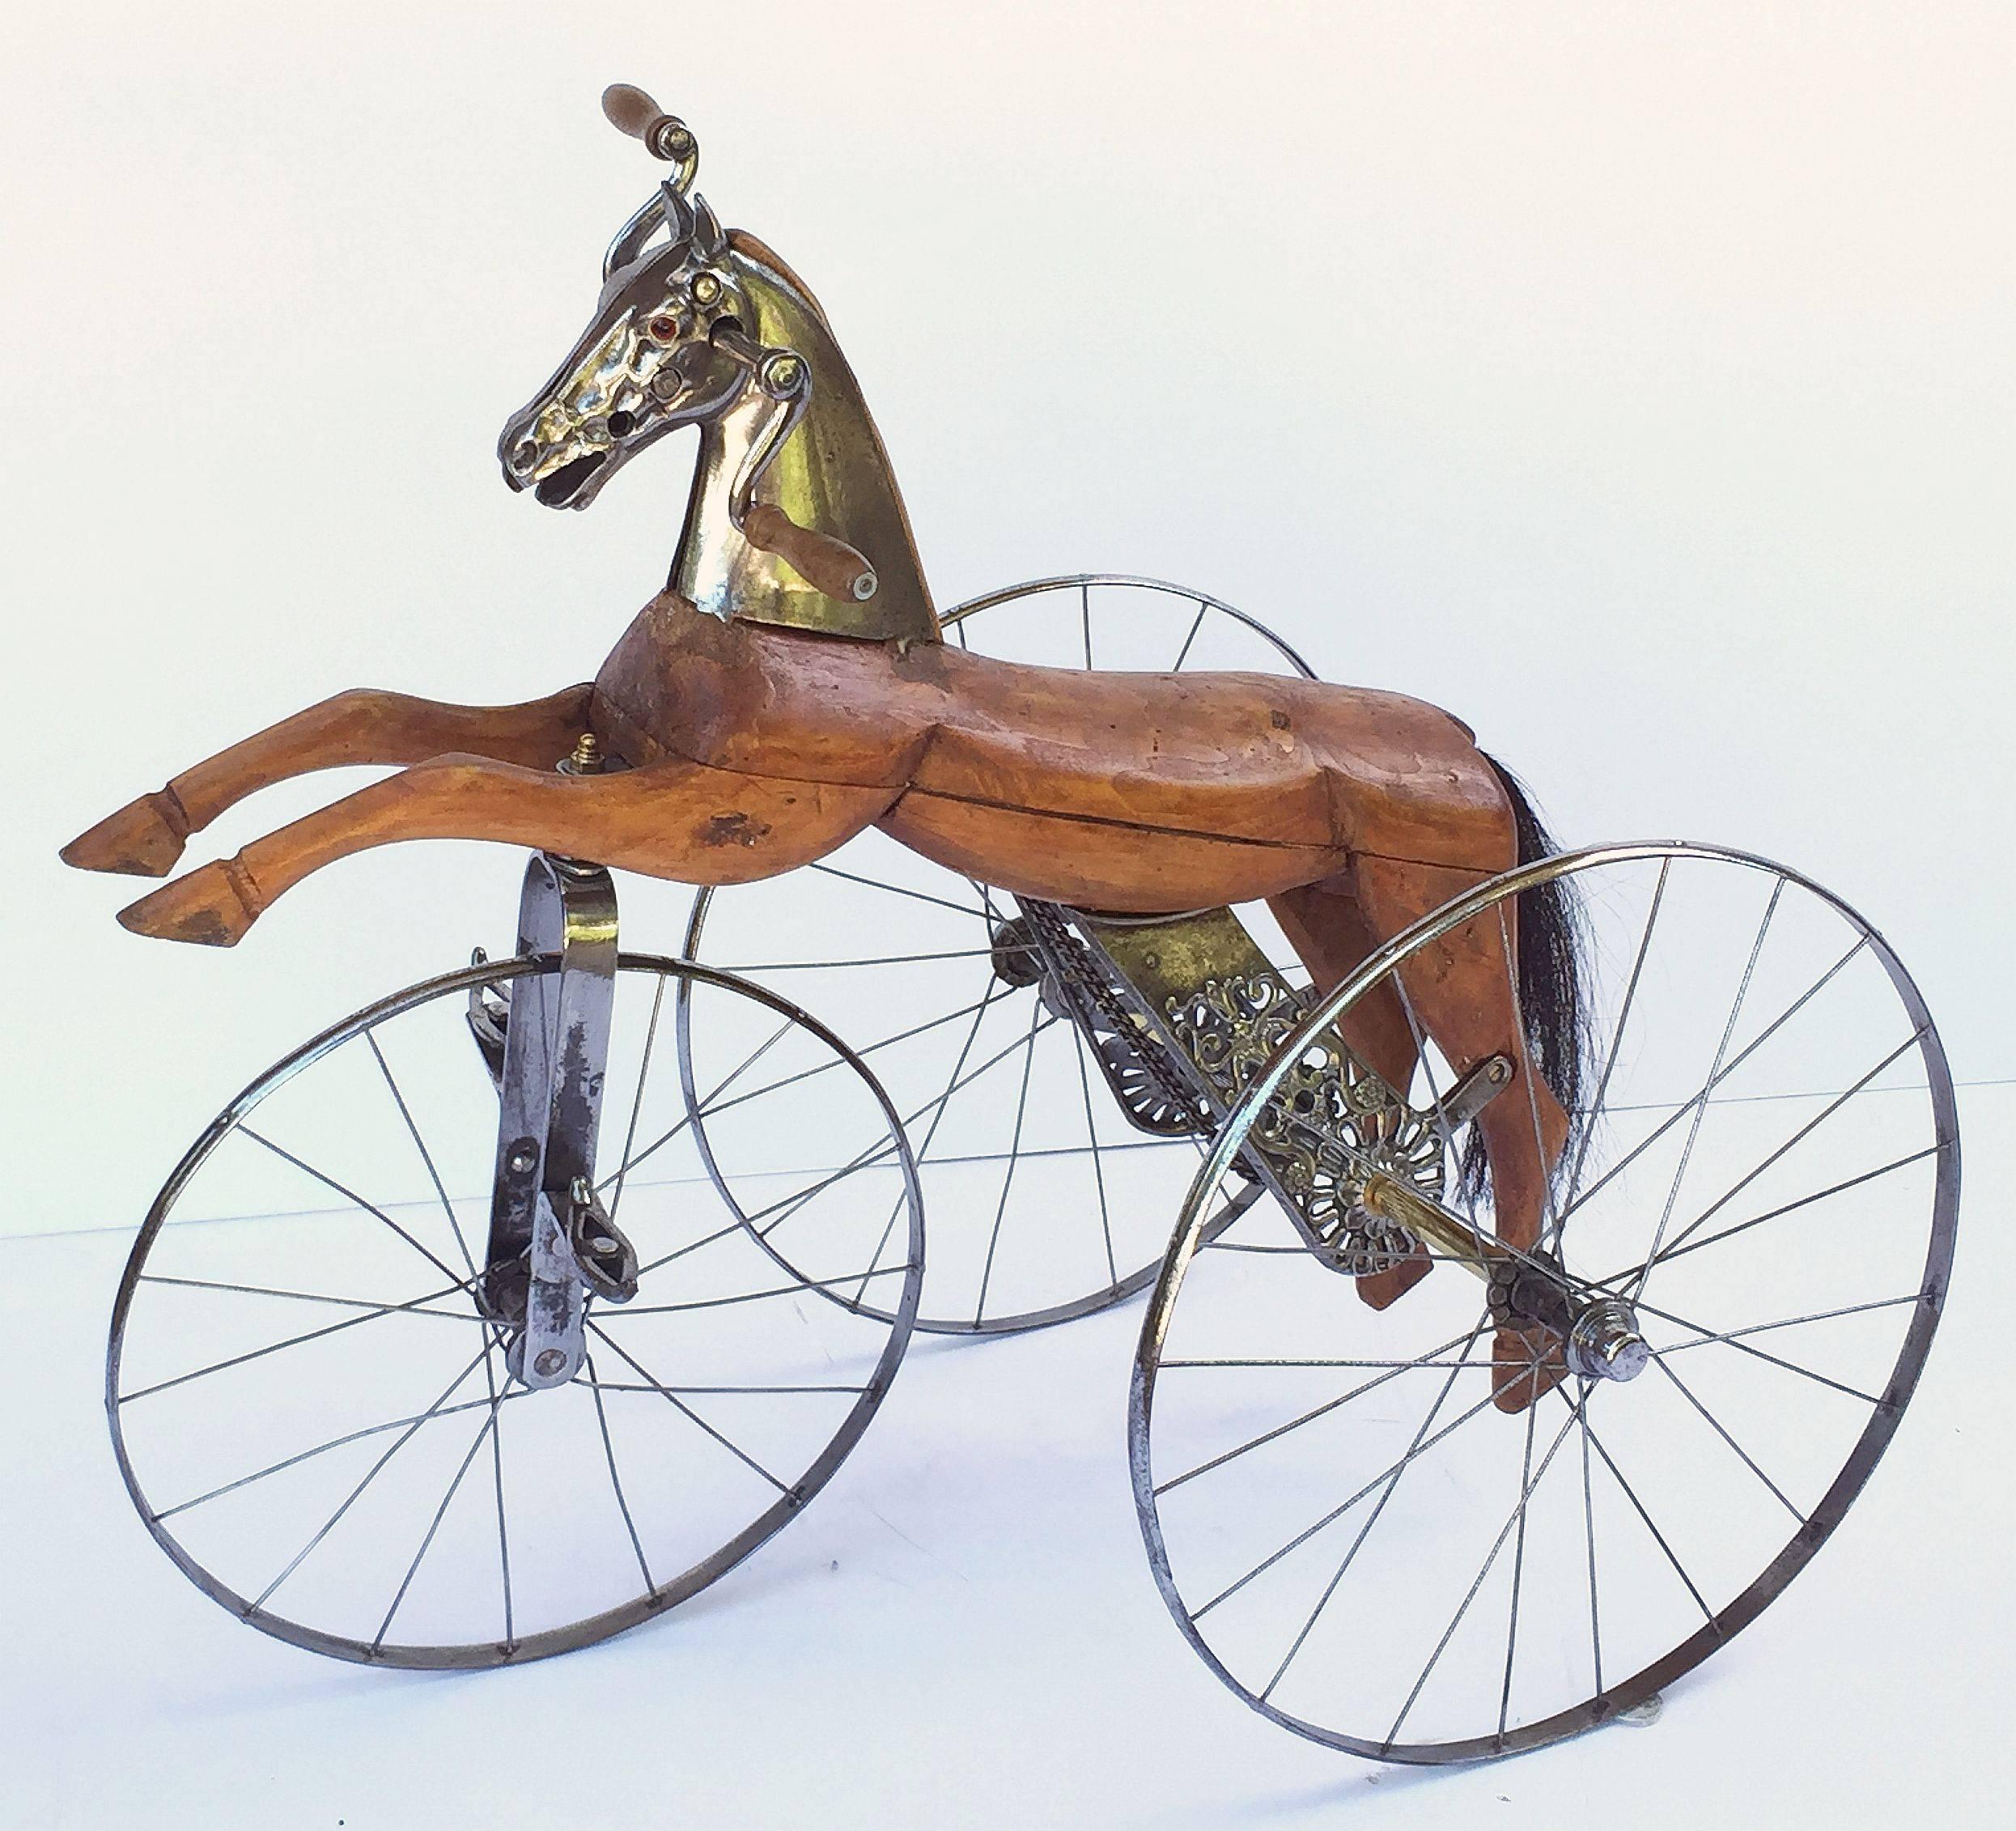 A 19th century French velocipede or child's toy horse tricycle featuring a body of carved wood with brushed steel face-plate and glass eyes, resting on spoke wheels with brass accoutrements and horse-hair tail.

A handsome objet d'art similar to